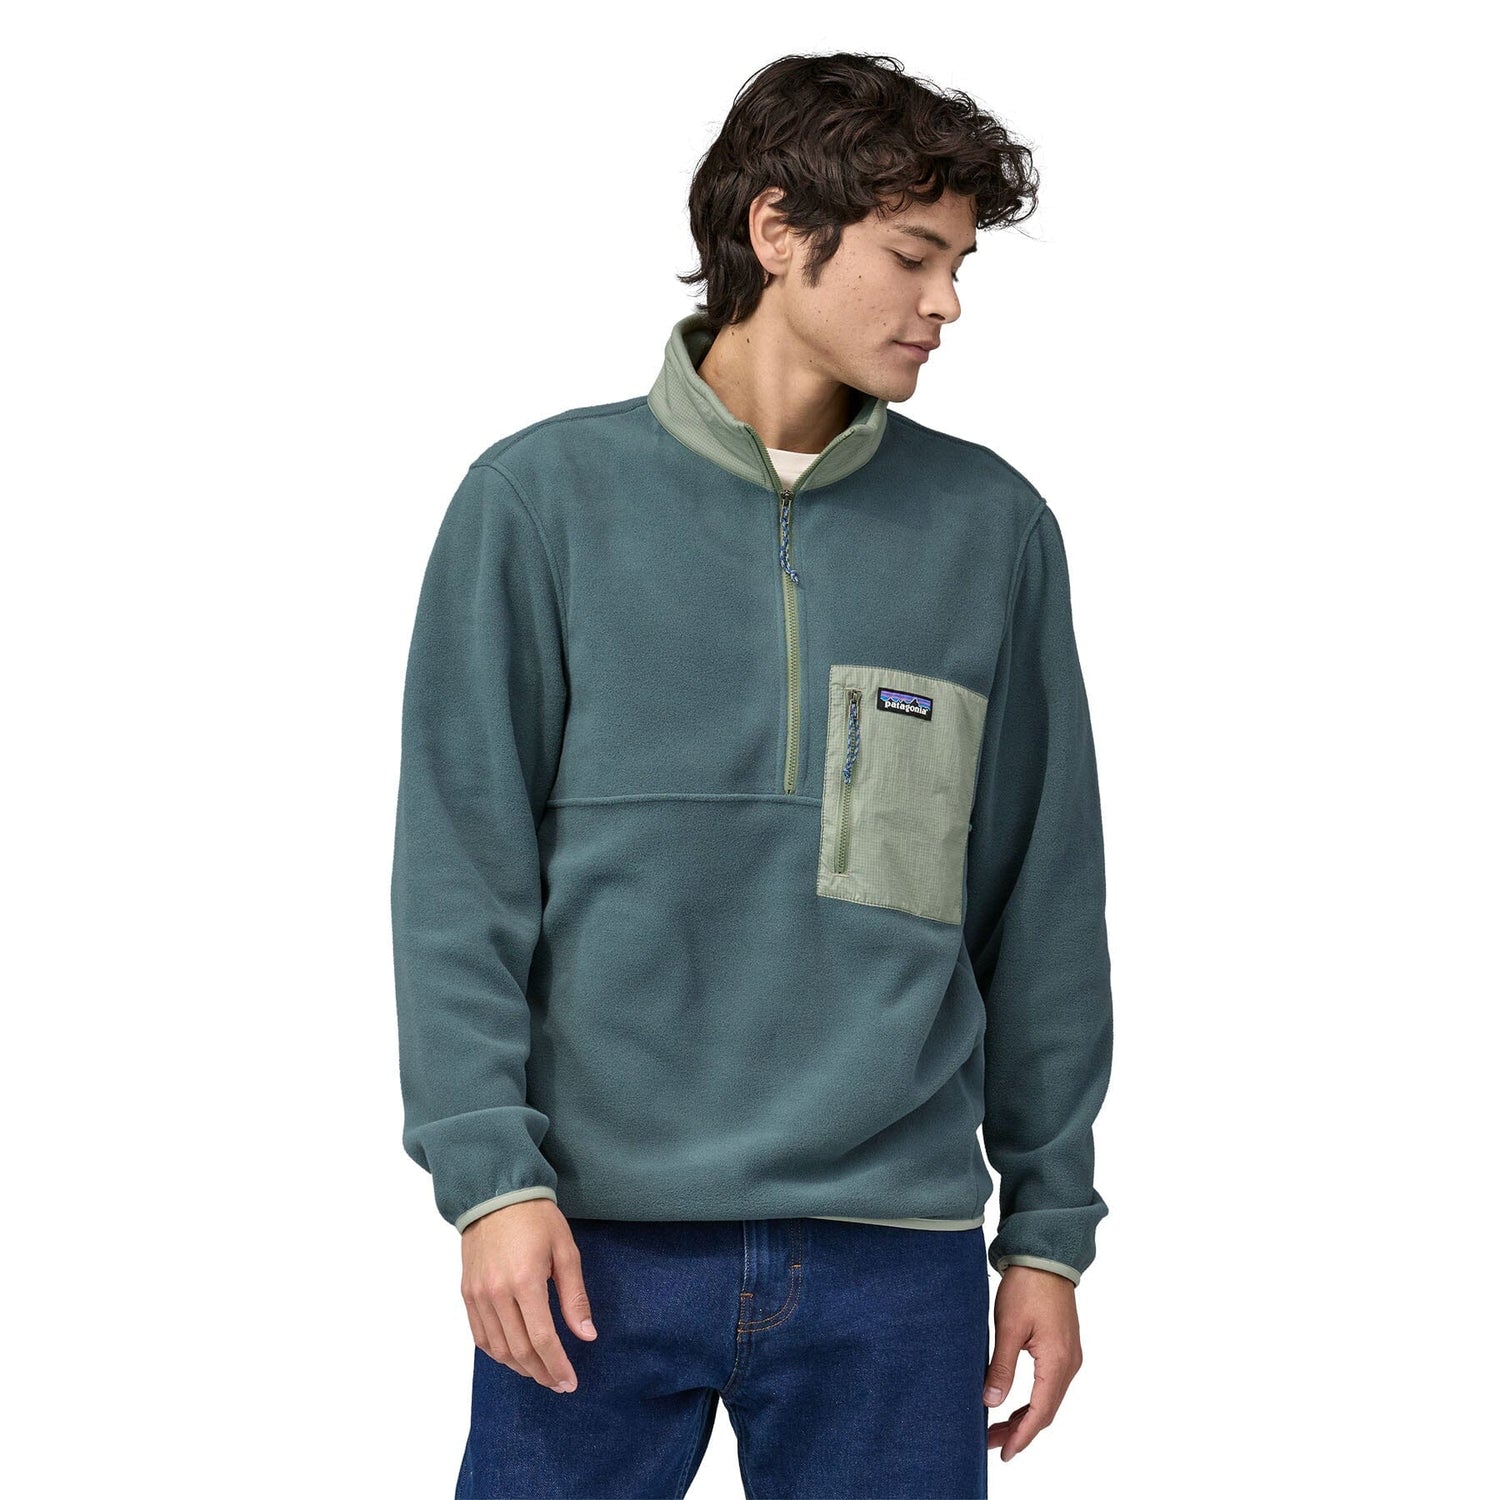 Patagonia - M's Microdini 1/2 Zip Fleece Pullover - 100% Recycled Polyester - Weekendbee - sustainable sportswear